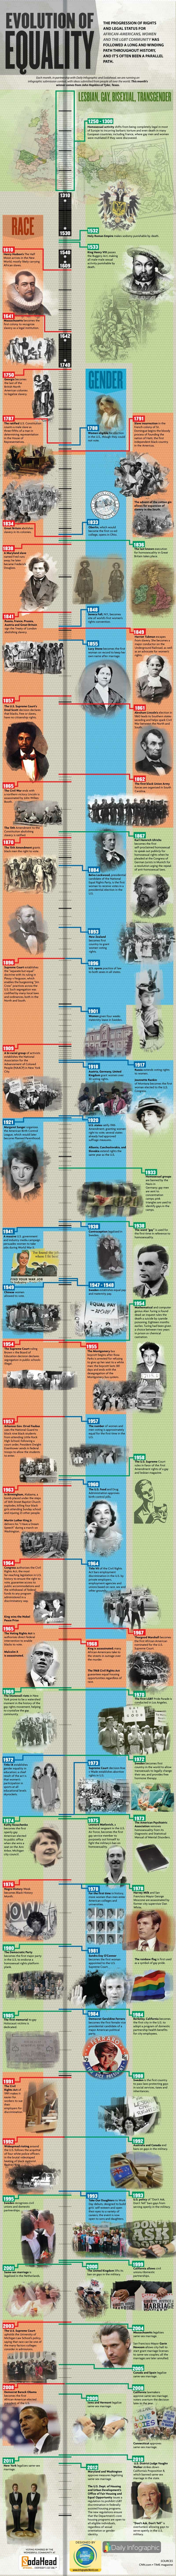 History of Equal Rights Movement